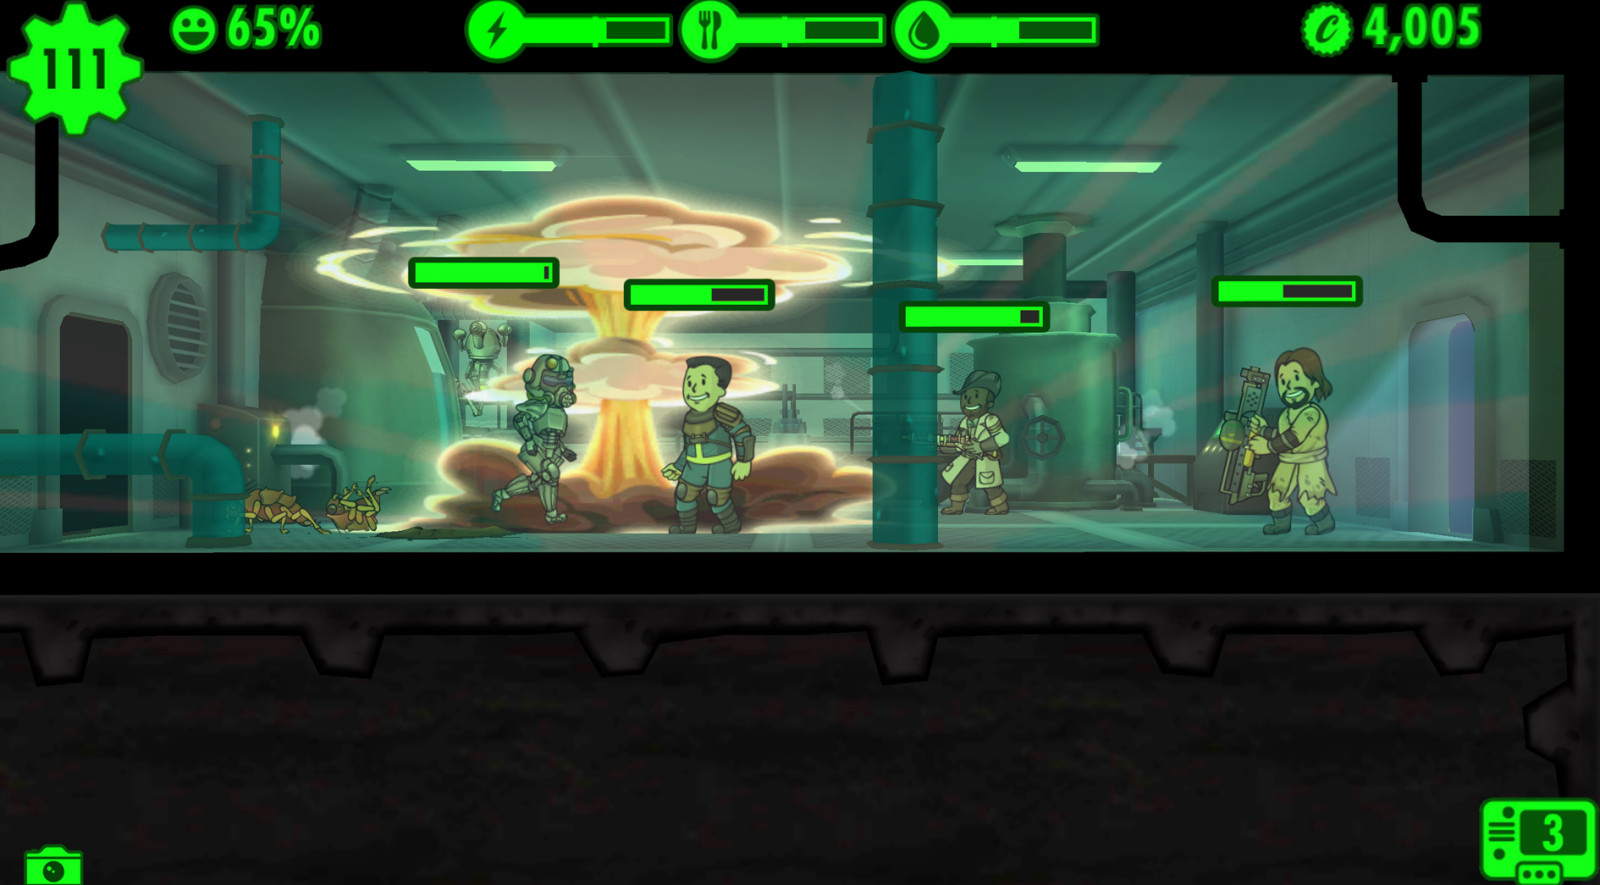 fallout shelter pc unlimited lunchboxes